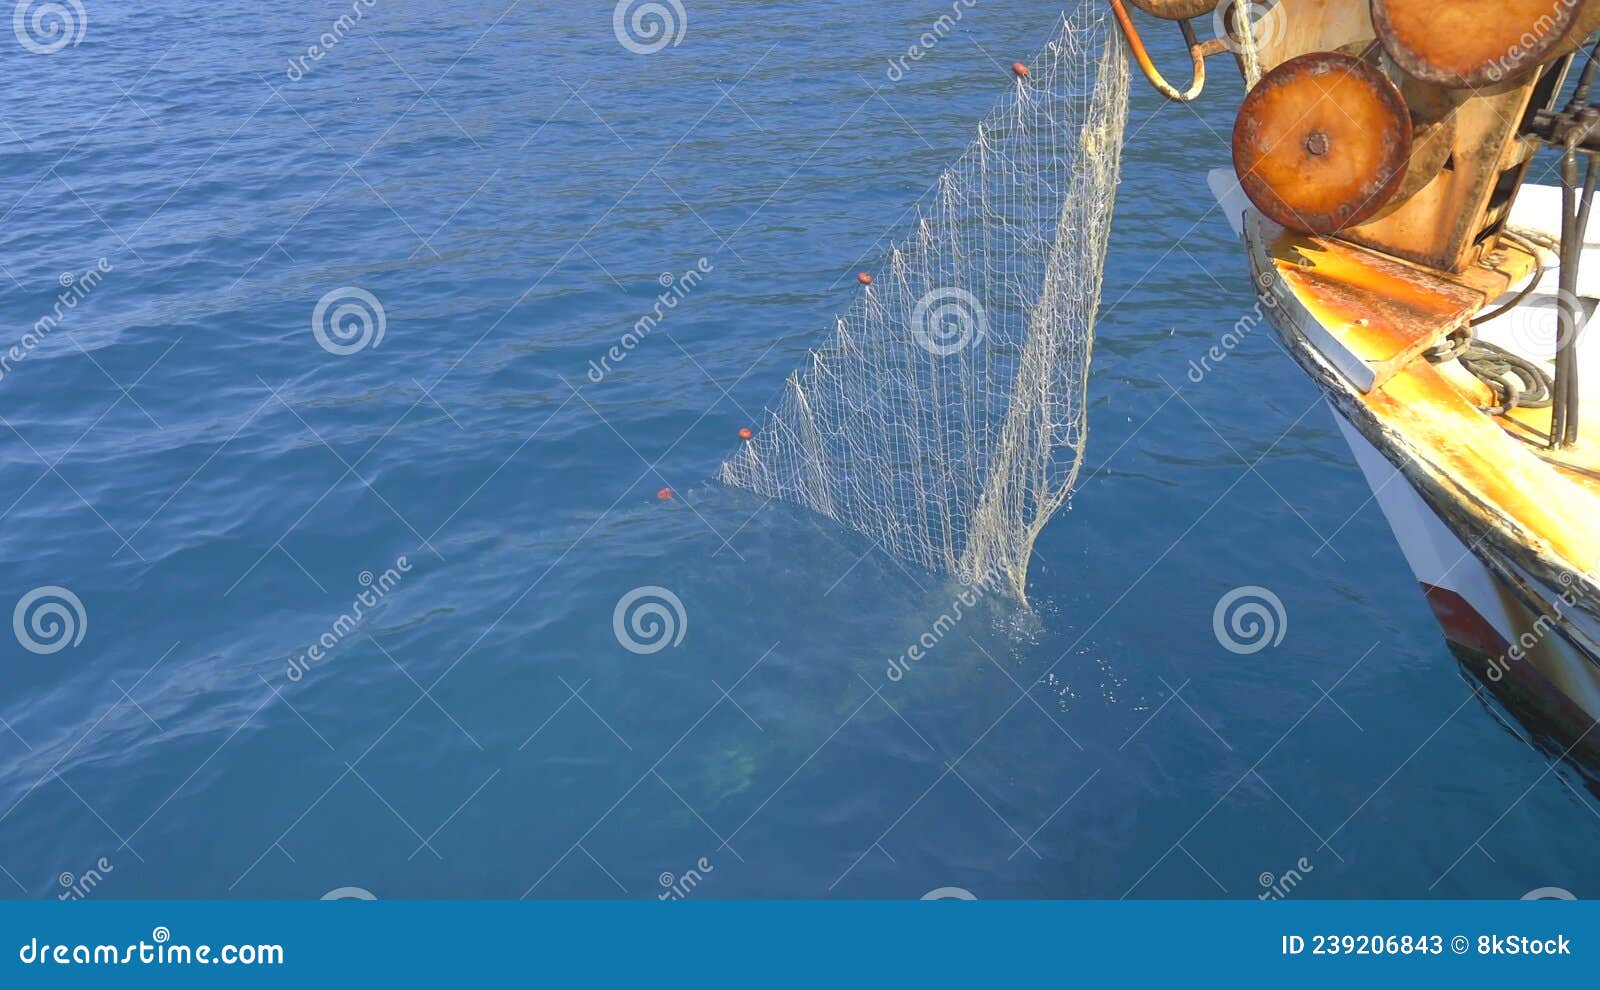 https://thumbs.dreamstime.com/z/net-reel-small-fishing-boat-pulling-nylon-float-line-attached-to-plastic-floats-old-going-sea-closeup-netting-spool-239206843.jpg